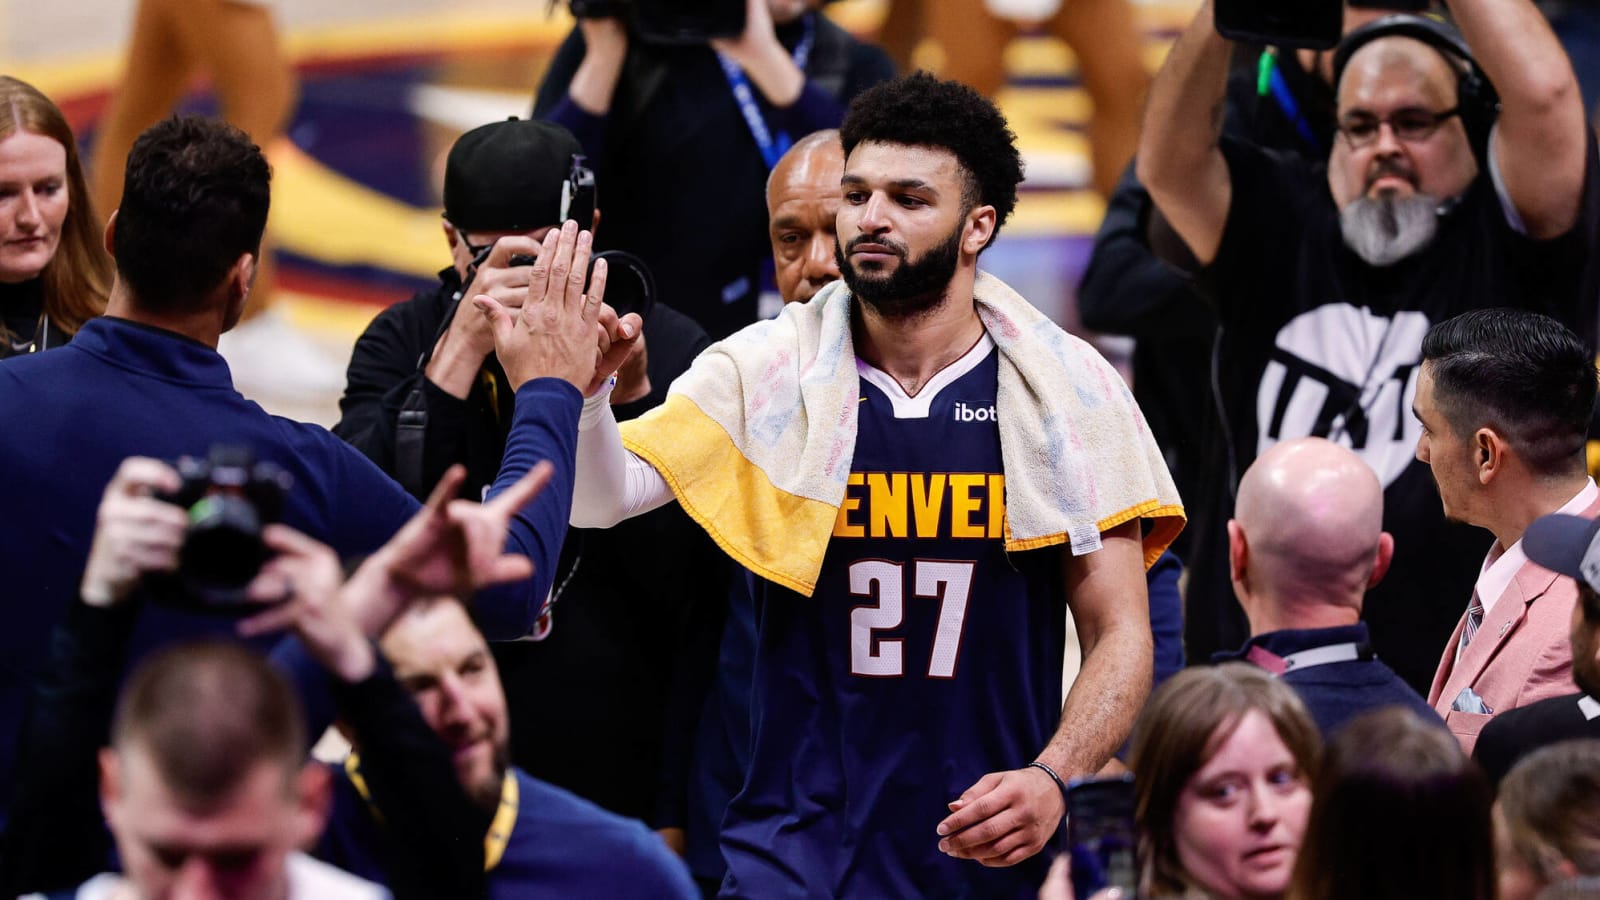 'When I was a little kid, I was wearing his jersey…' Jamal Murray shows respect to LeBron James after putting Lakers superstar on highlight reel